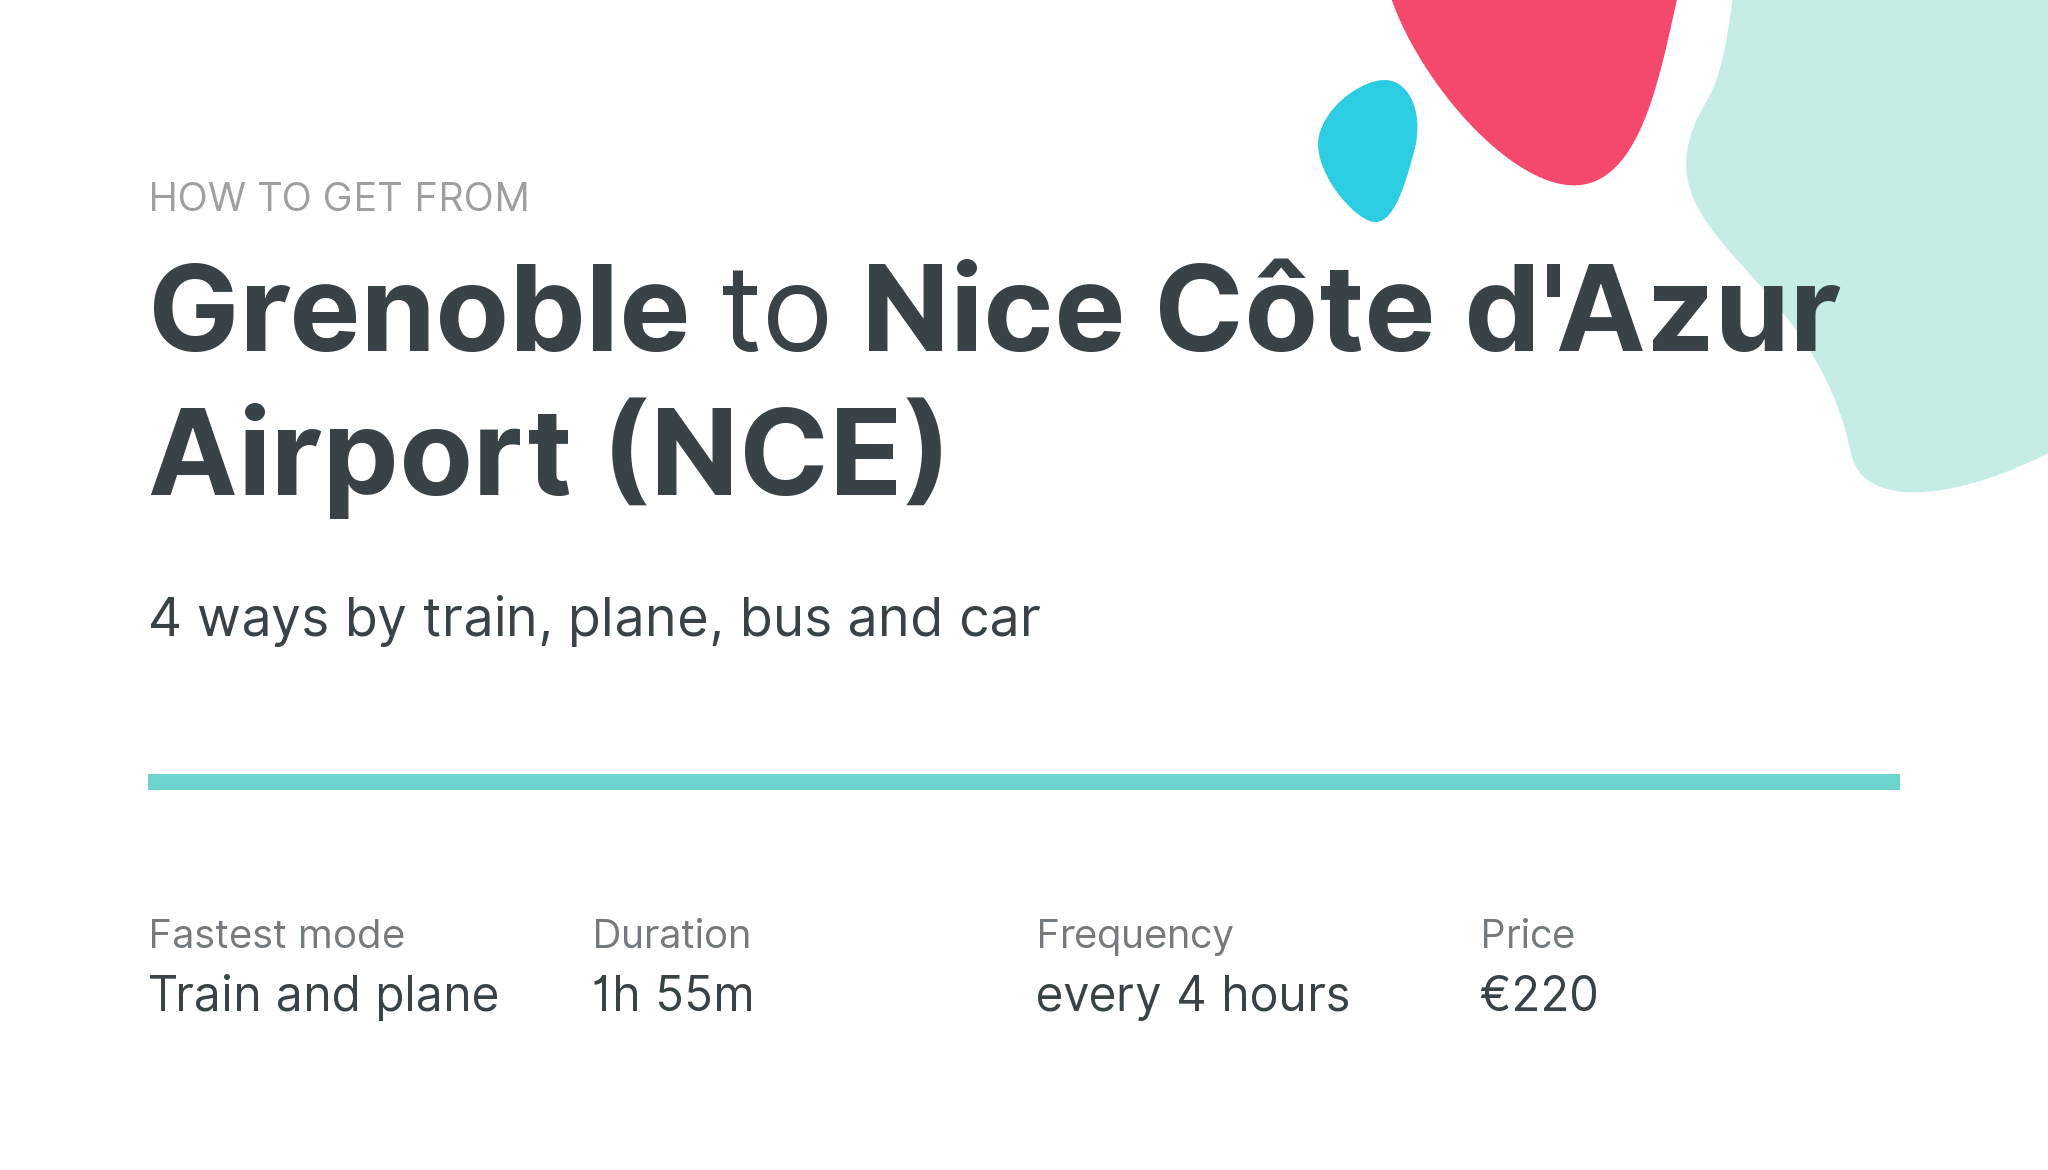 How do I get from Grenoble to Nice Côte d'Azur Airport (NCE)